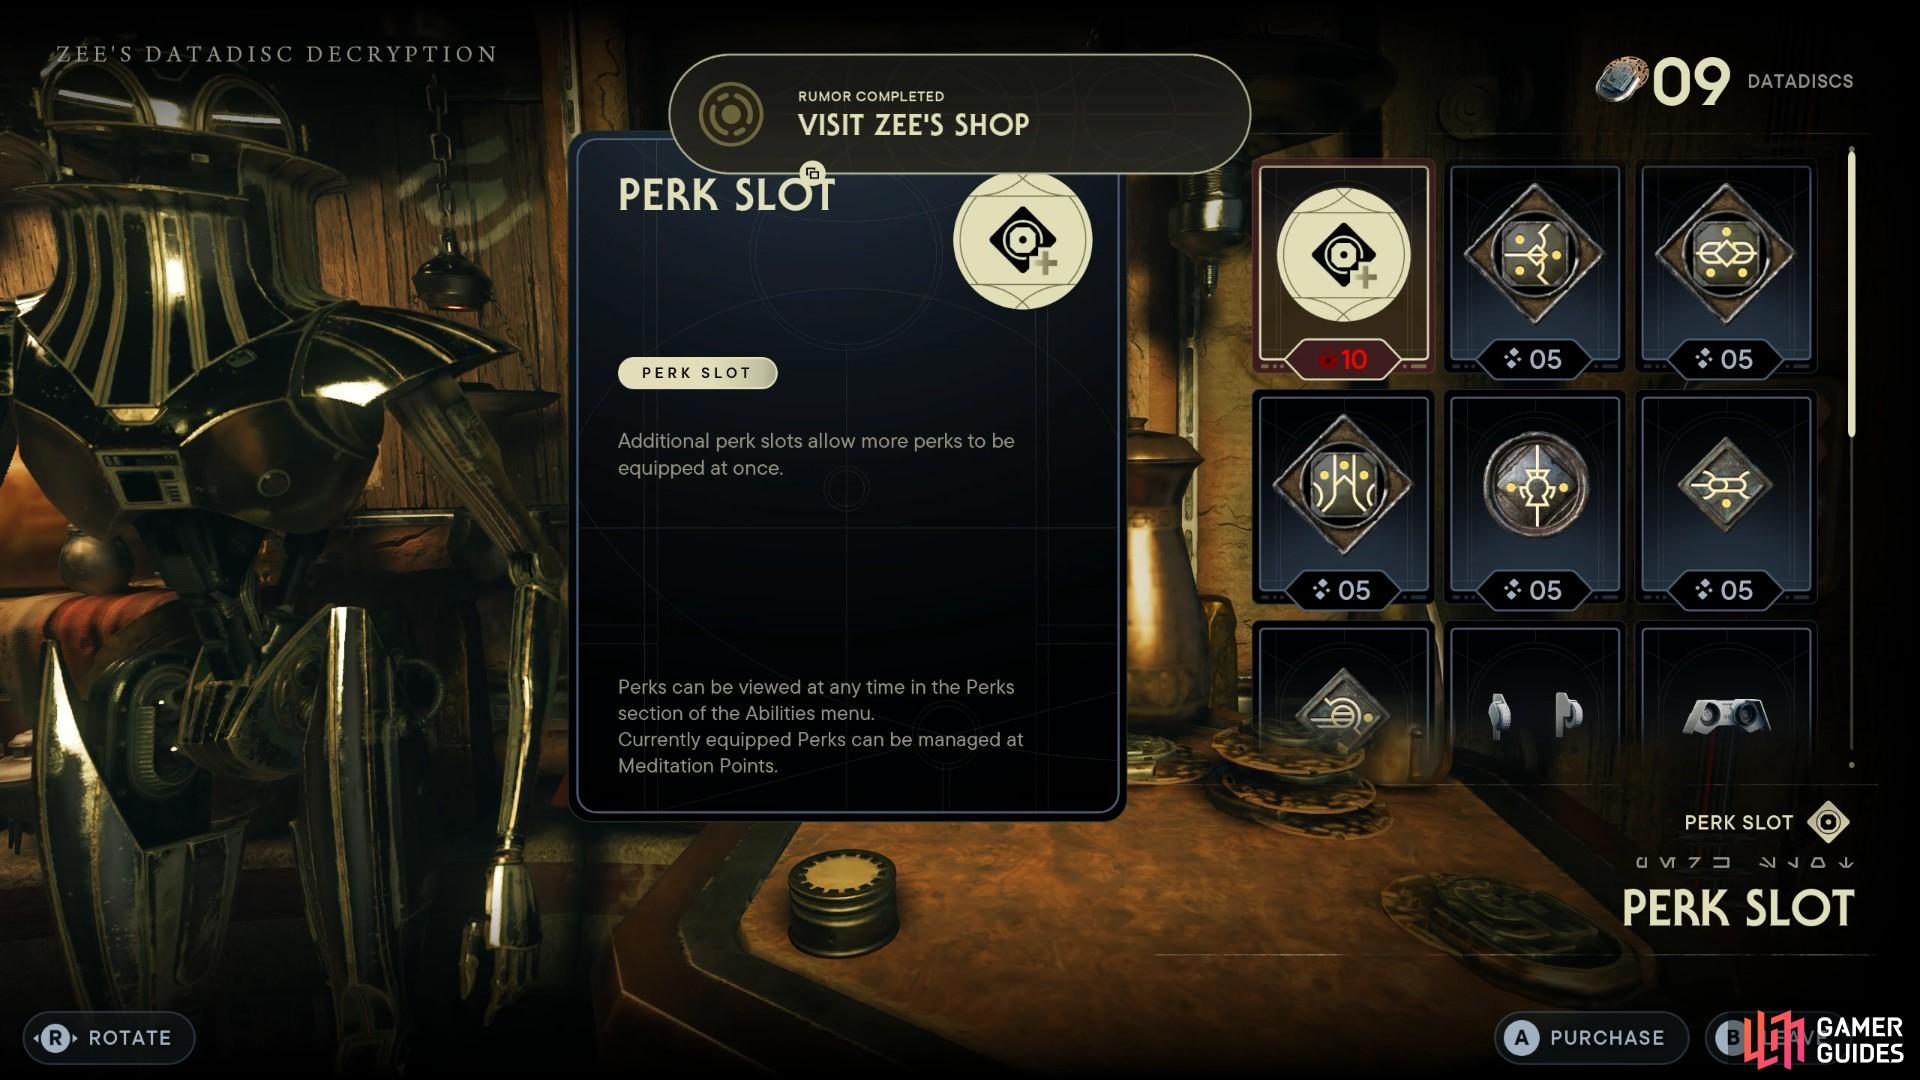 You can buy your fourth perk slot, and many other perks in Jedi Survivor by trading Datadiscs to Zee when you unlock her in the Pyloon Saloon.